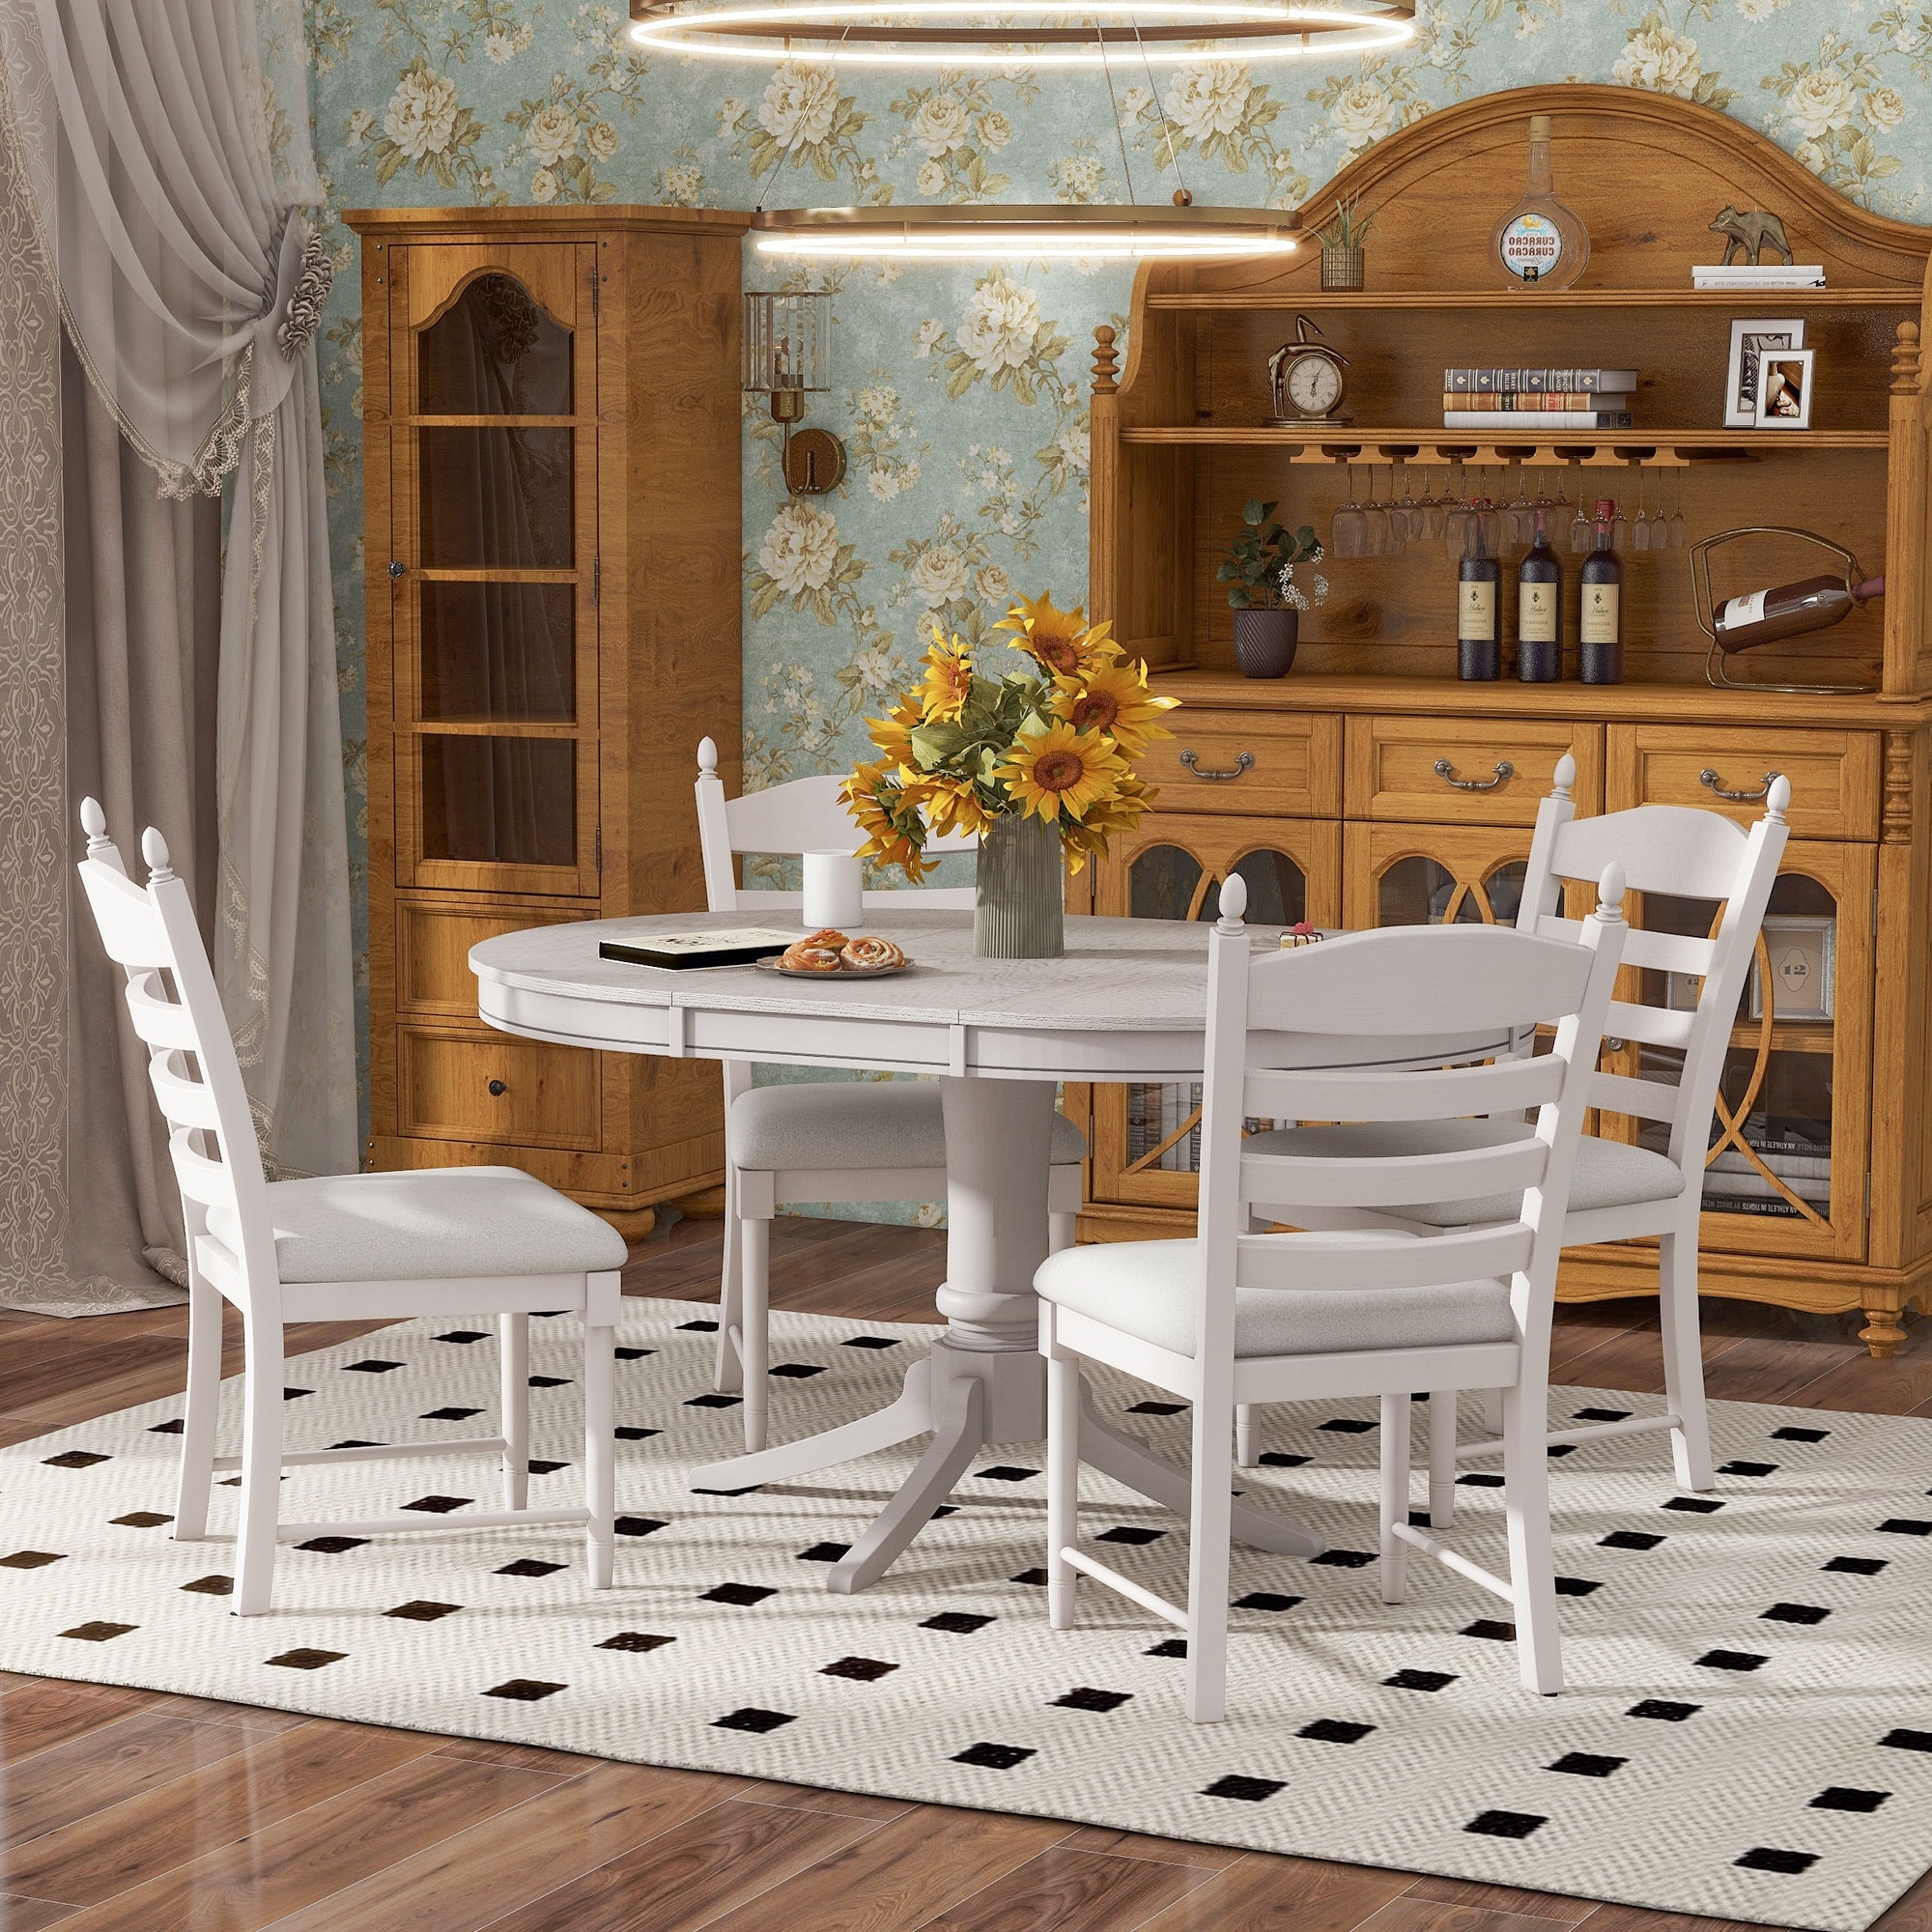 https://ak1.ostkcdn.com/images/products/is/images/direct/3416fa2b03bd31cf0e3046d04e695b23572be892/Vintage-5-Piece-Dining-Table-Set-with-Round-Wood-Extendable-Dining-Table-and-Ladder-Back-Upholstered-Chairs-for-Diningroom.jpg